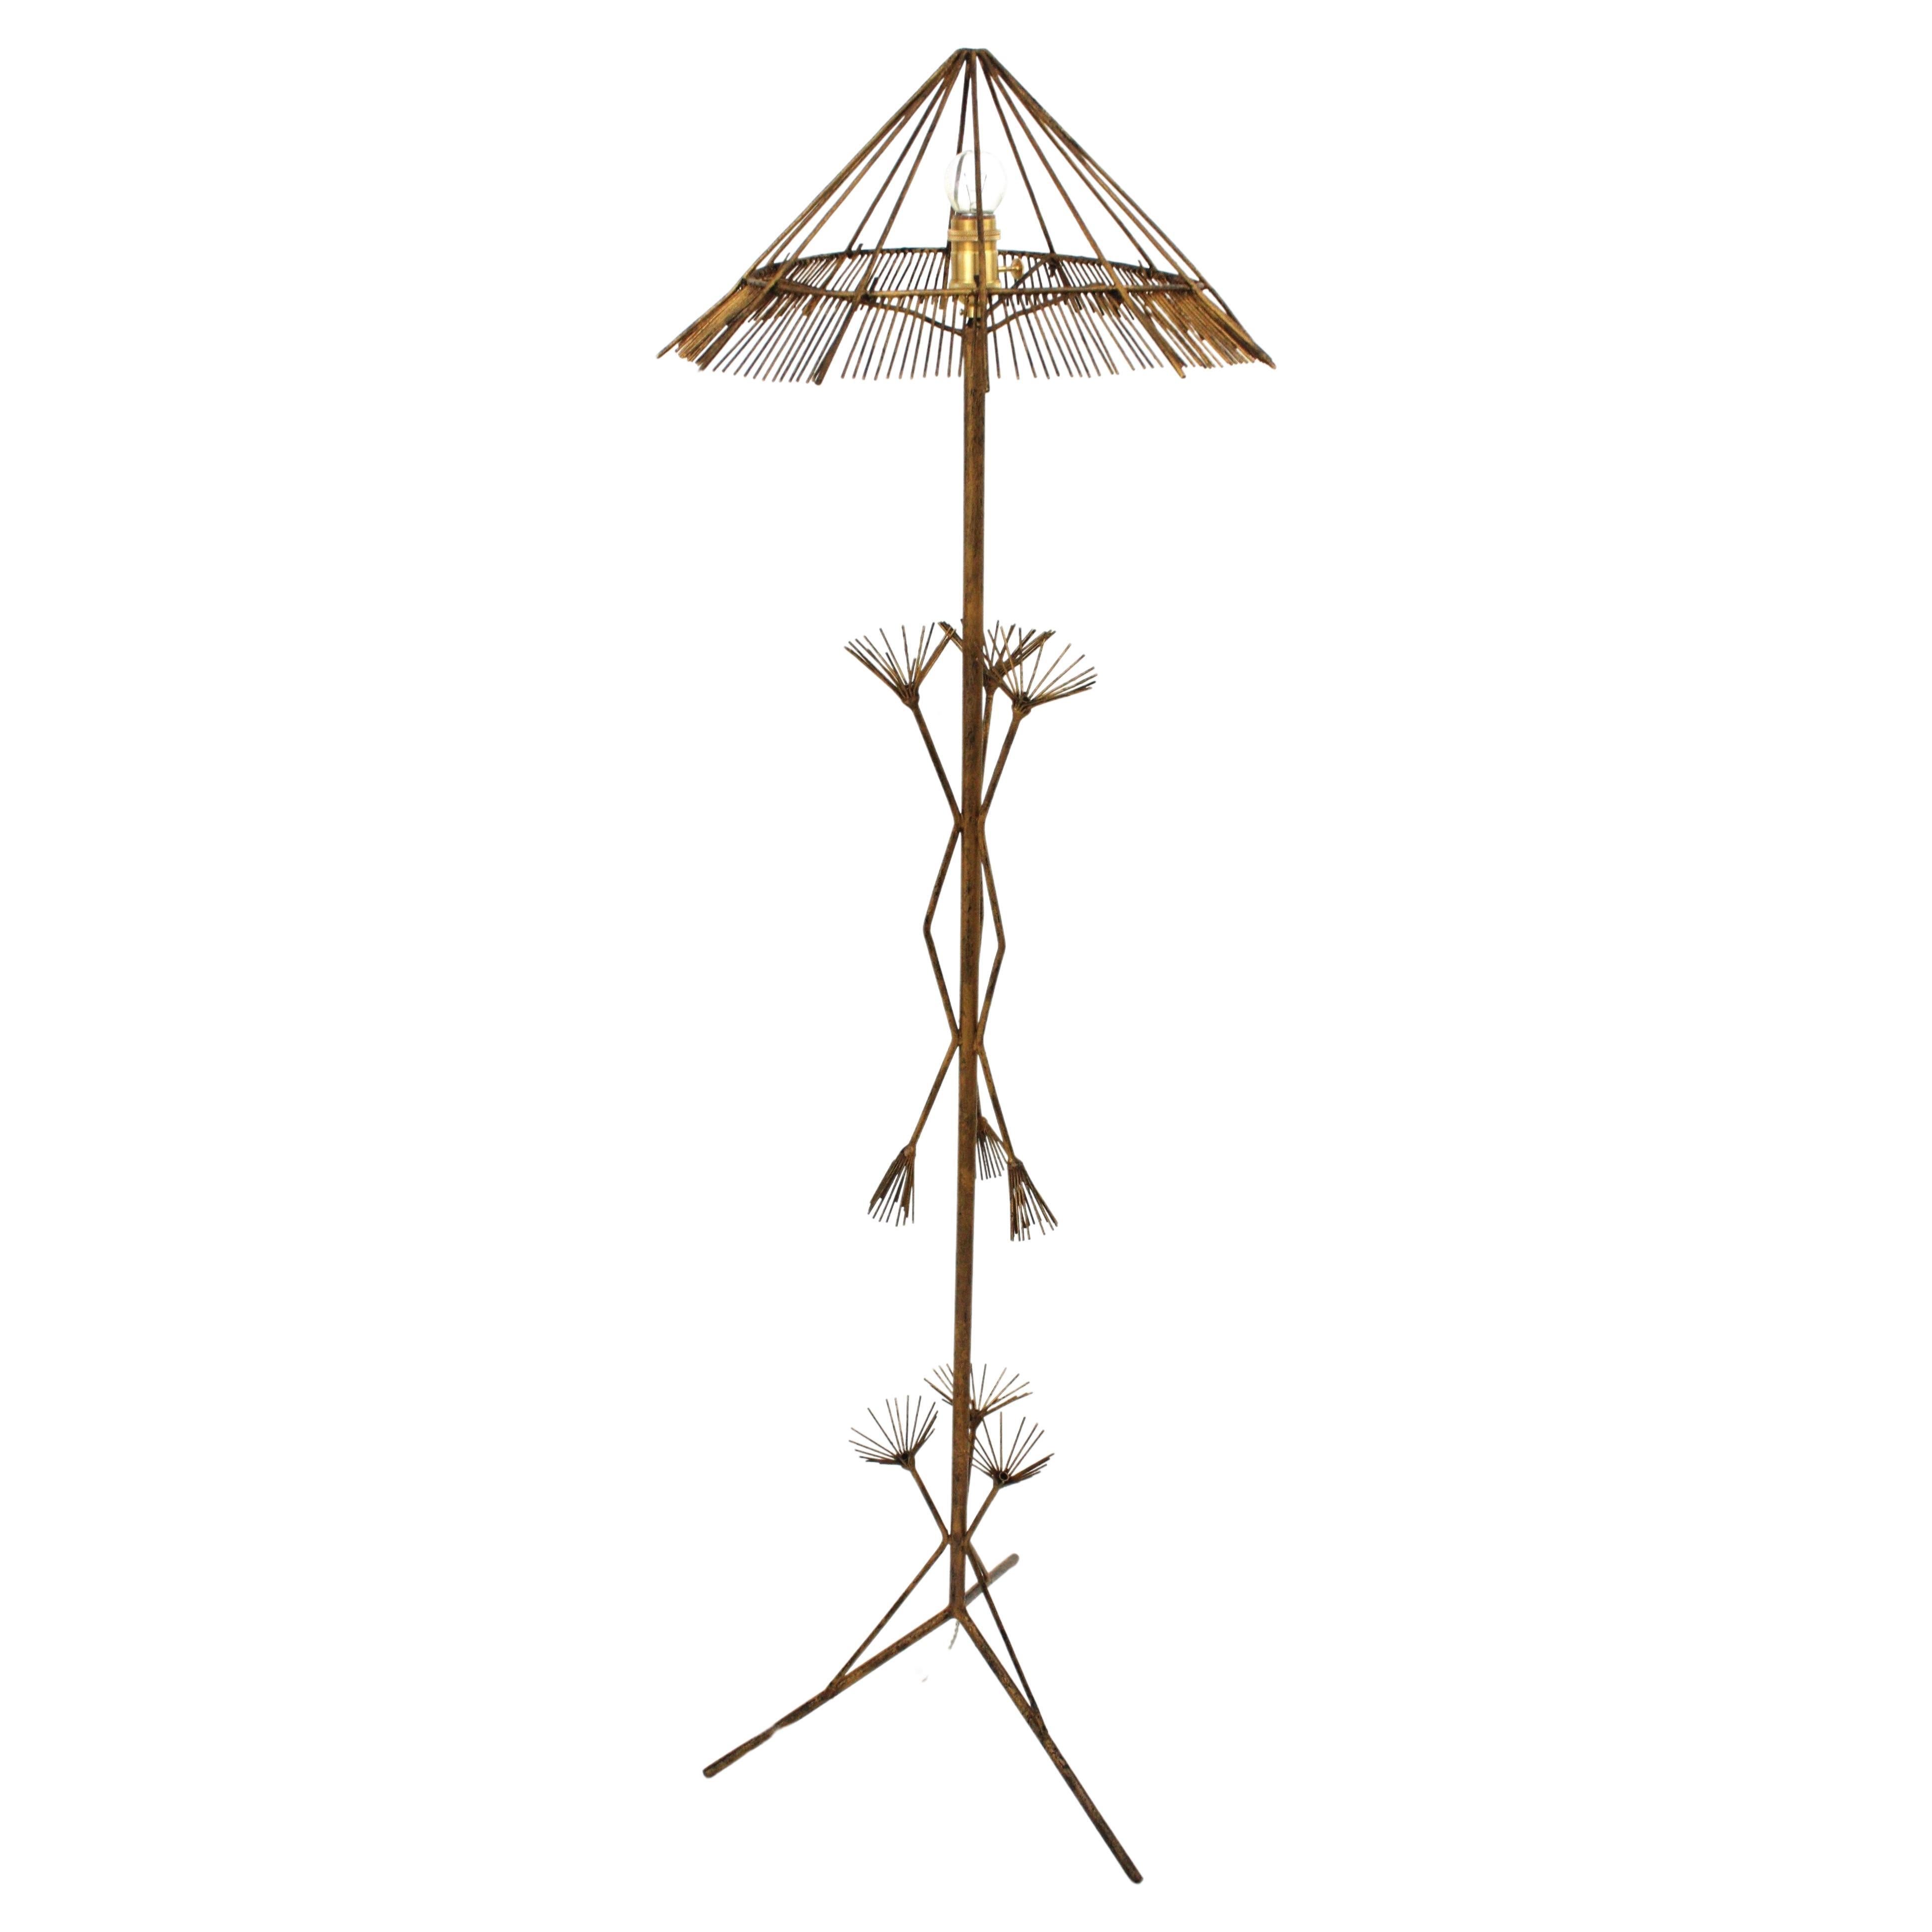 One of a Kind Gilt Iron Chinoiserie inspired Tripod Floor Lamp in Gilt Iron,  France, 1950s
Eye-catching tripod floor lamp made in France at the Mid-century Modern period with Chinoiserie accents.
Beautiful design with oriental inspiration and